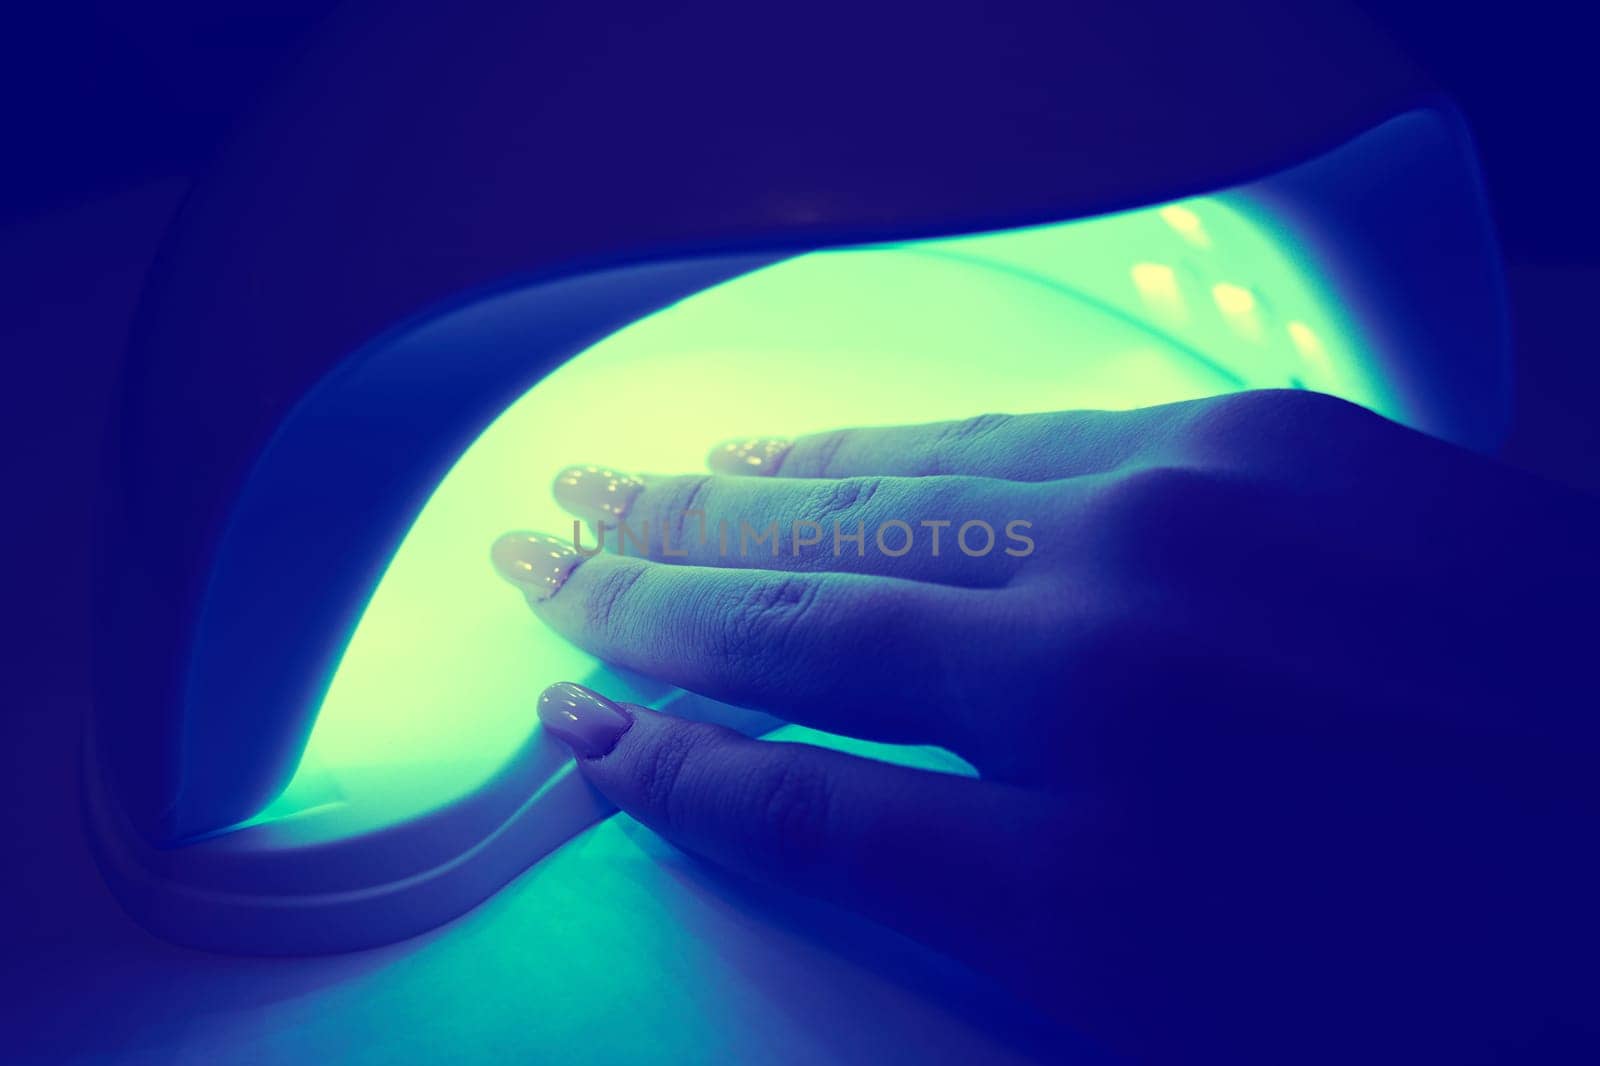 Girl's hand inside an ultraviolet lamp for drying nail polish close-up. Color toning applied by DAndreev